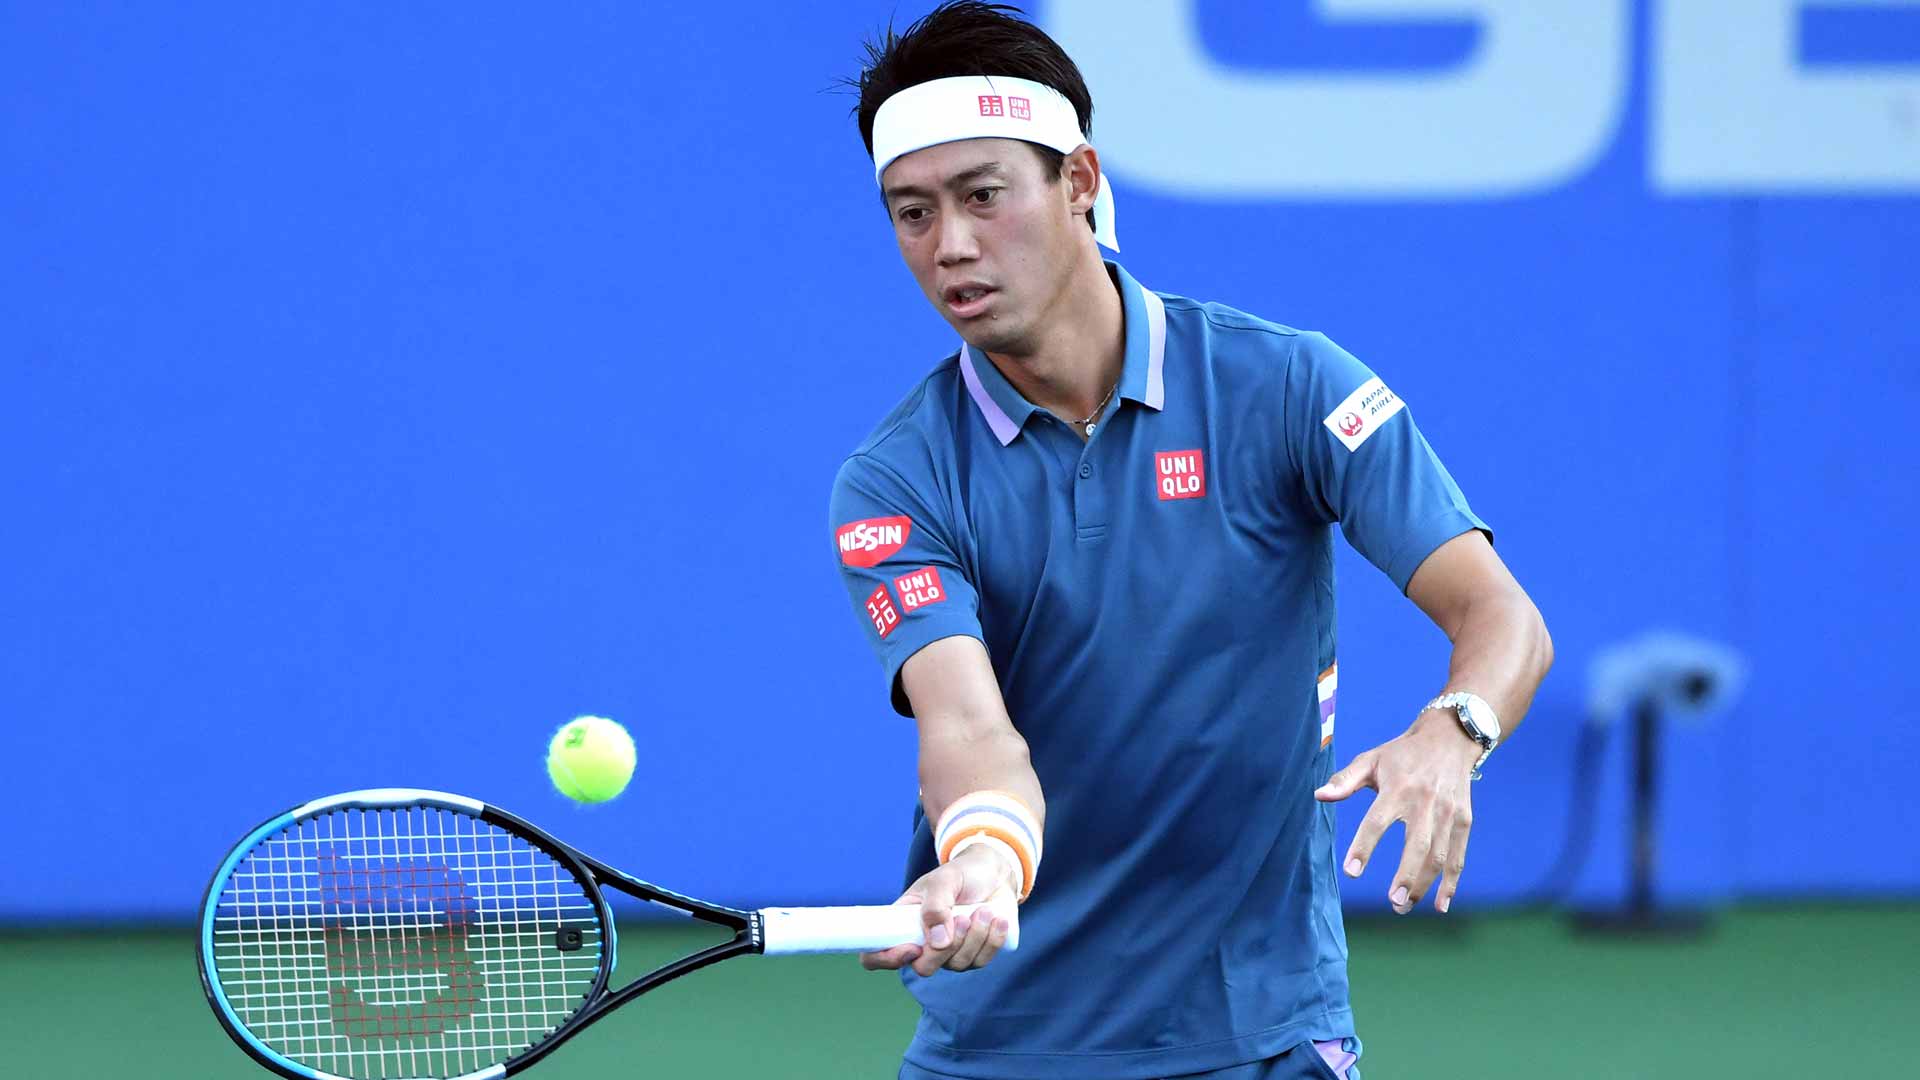 Kei Nishikori will play his first ATP Tour event since October 2021.